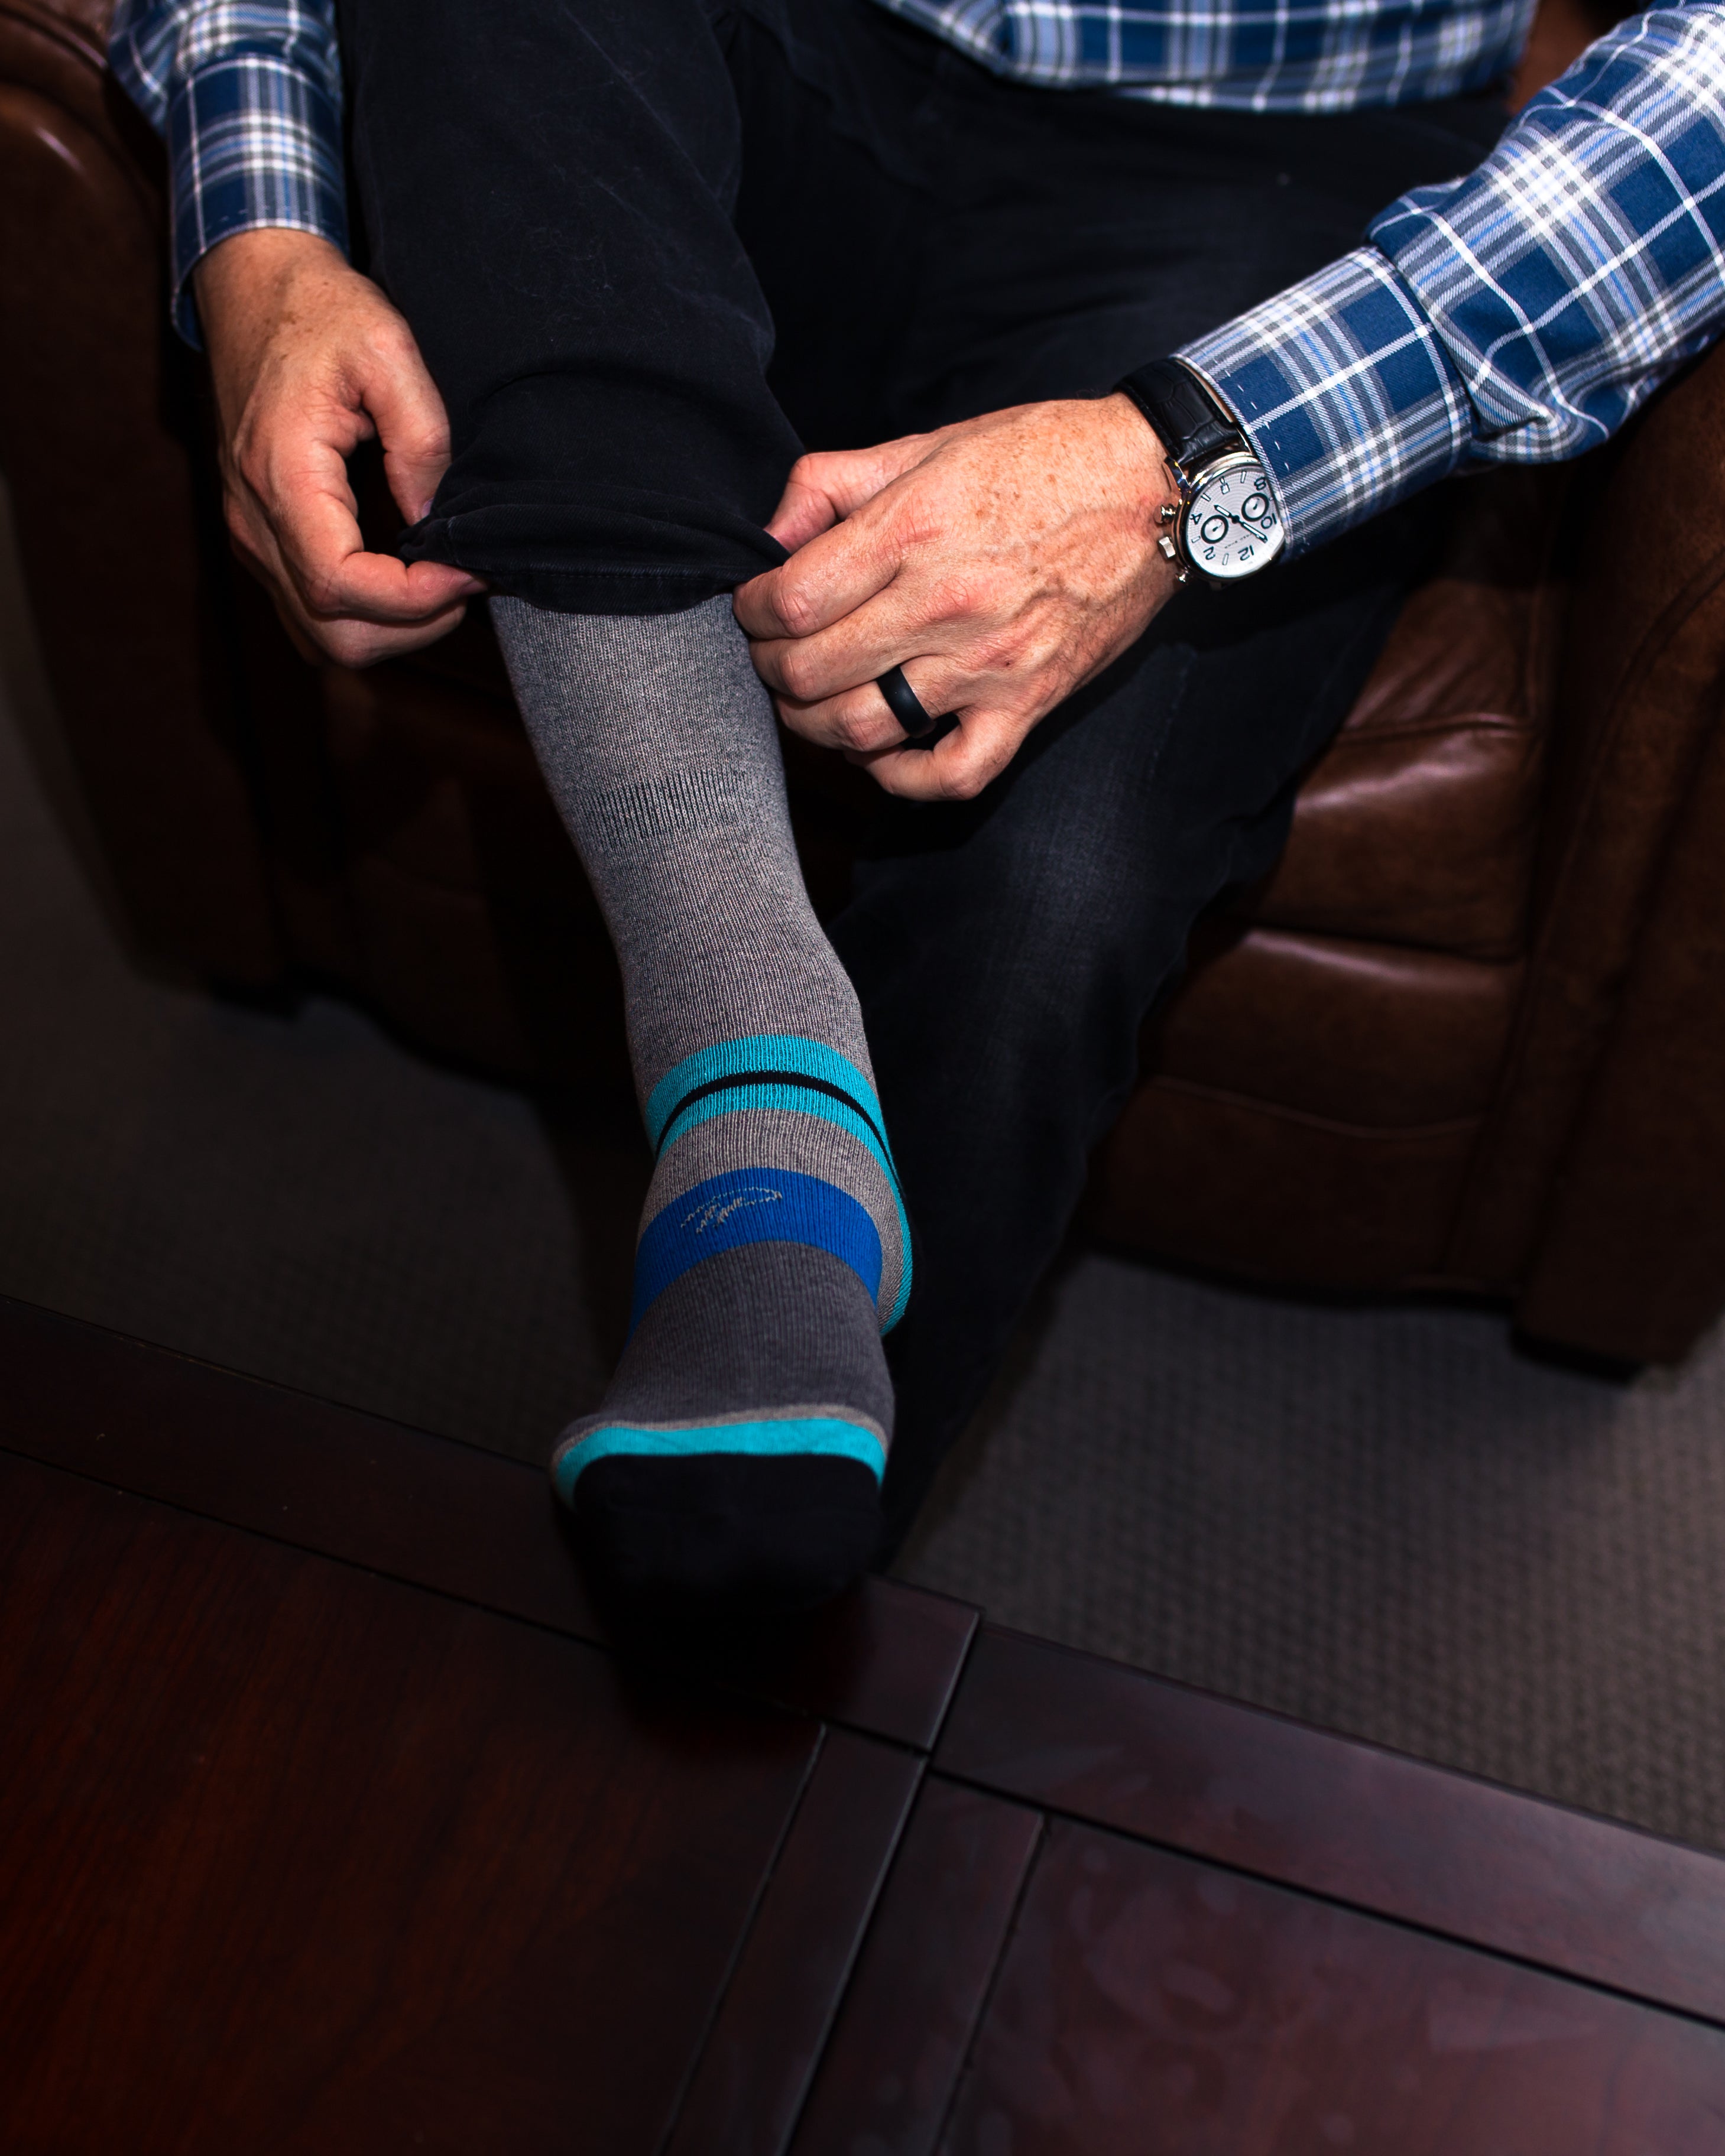 grey over the calf dress socks with light blue and blue stripes, black jeans, black watch